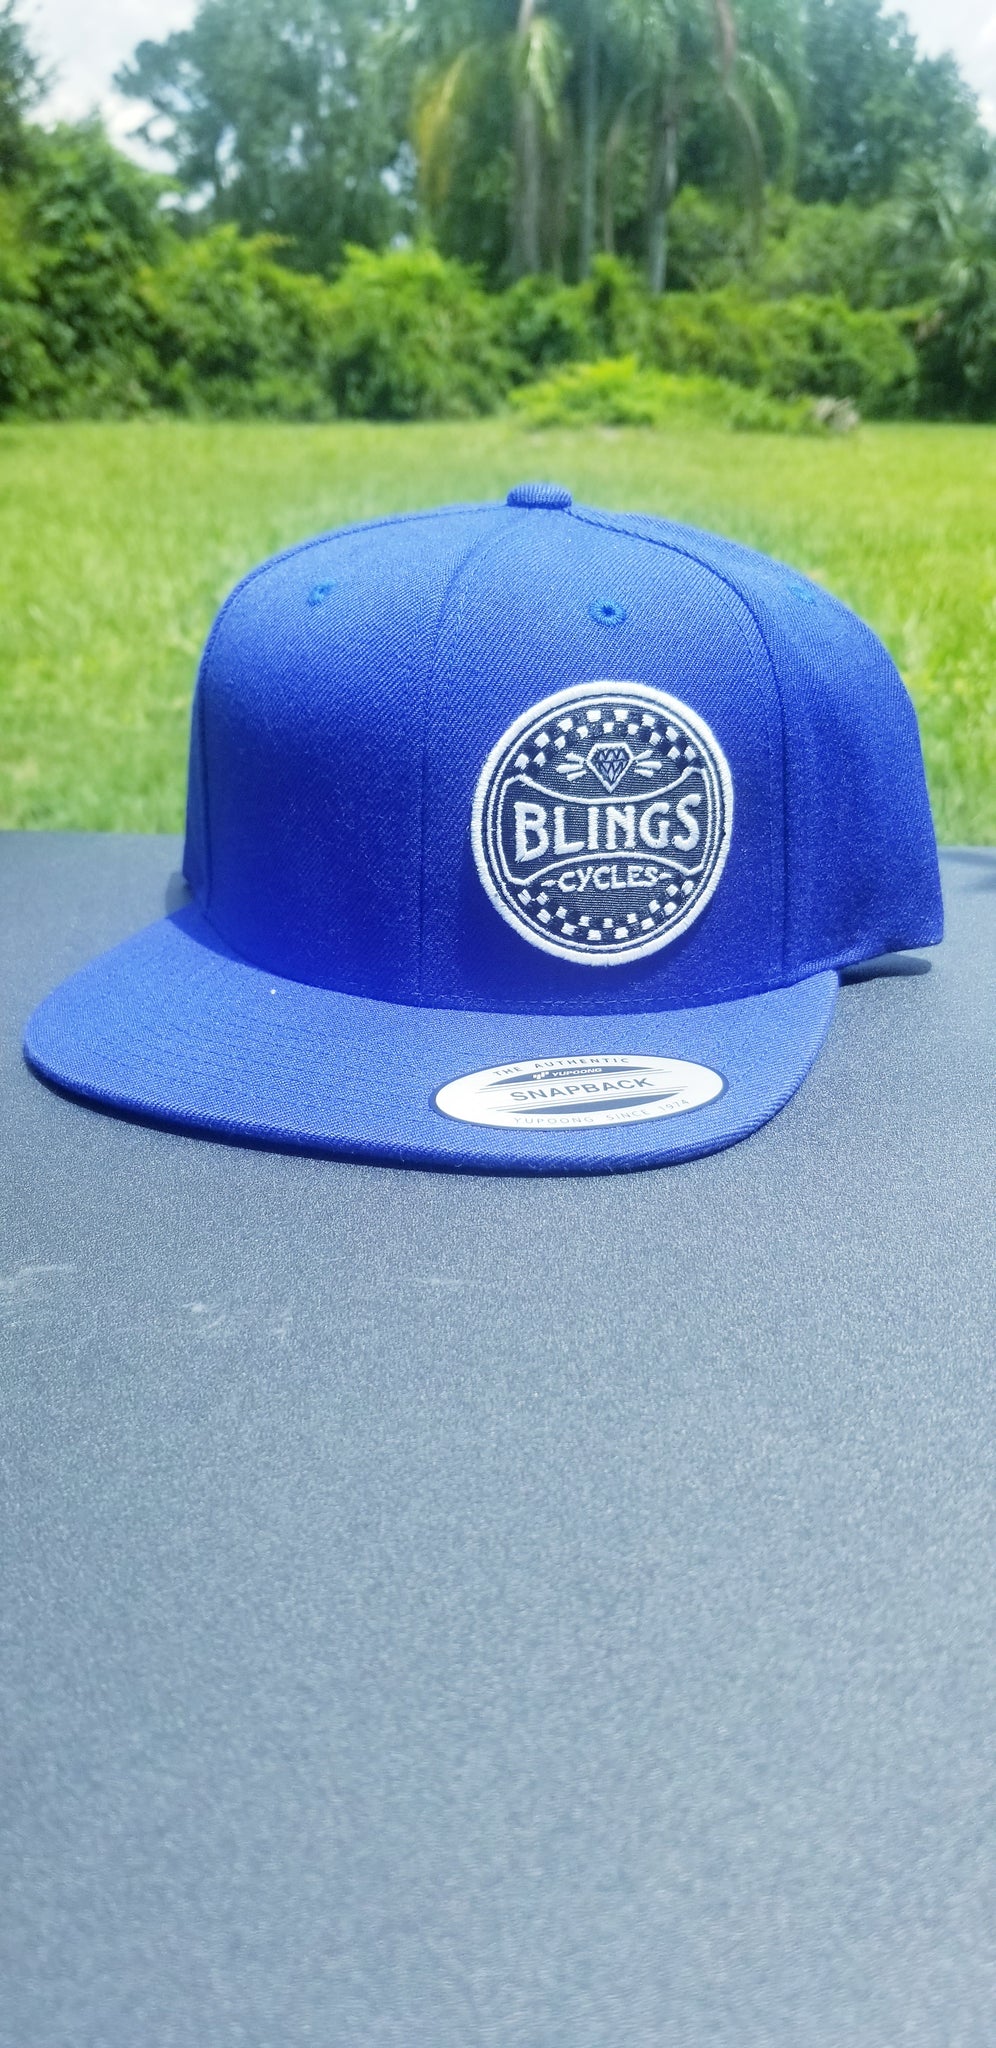 BLINGS CYCLES HATS